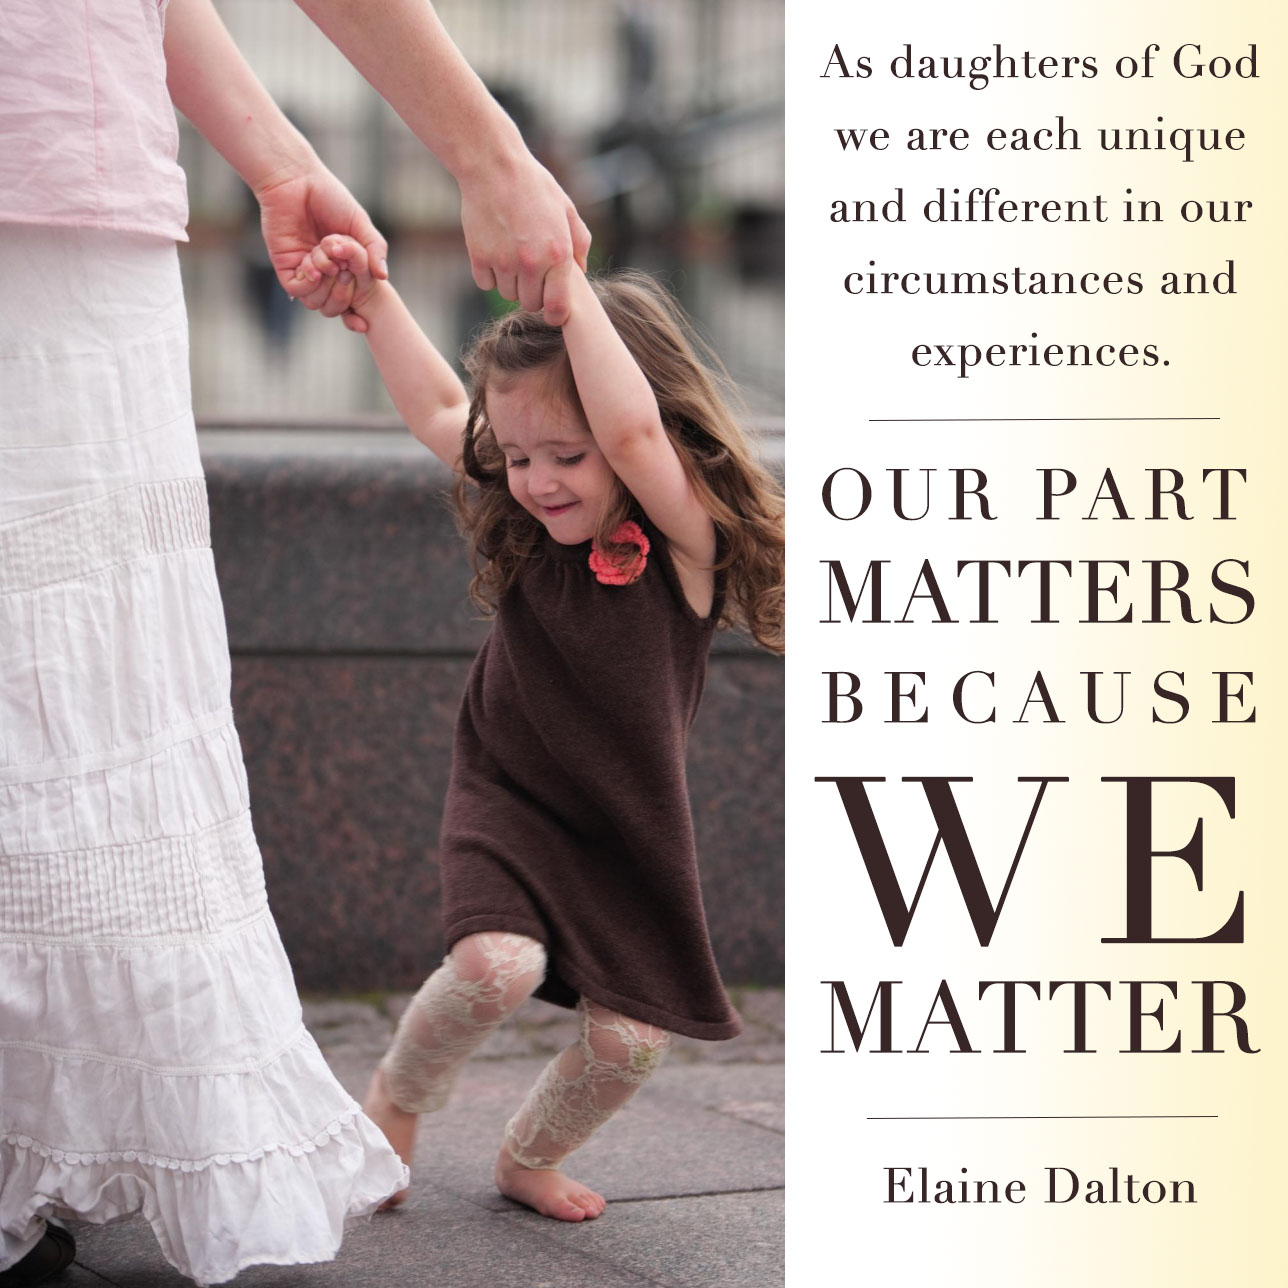 As daughters of God we are each unique and different in our circumstances and experiences. And yet our part matters—because we matter - Elaine Dalton 